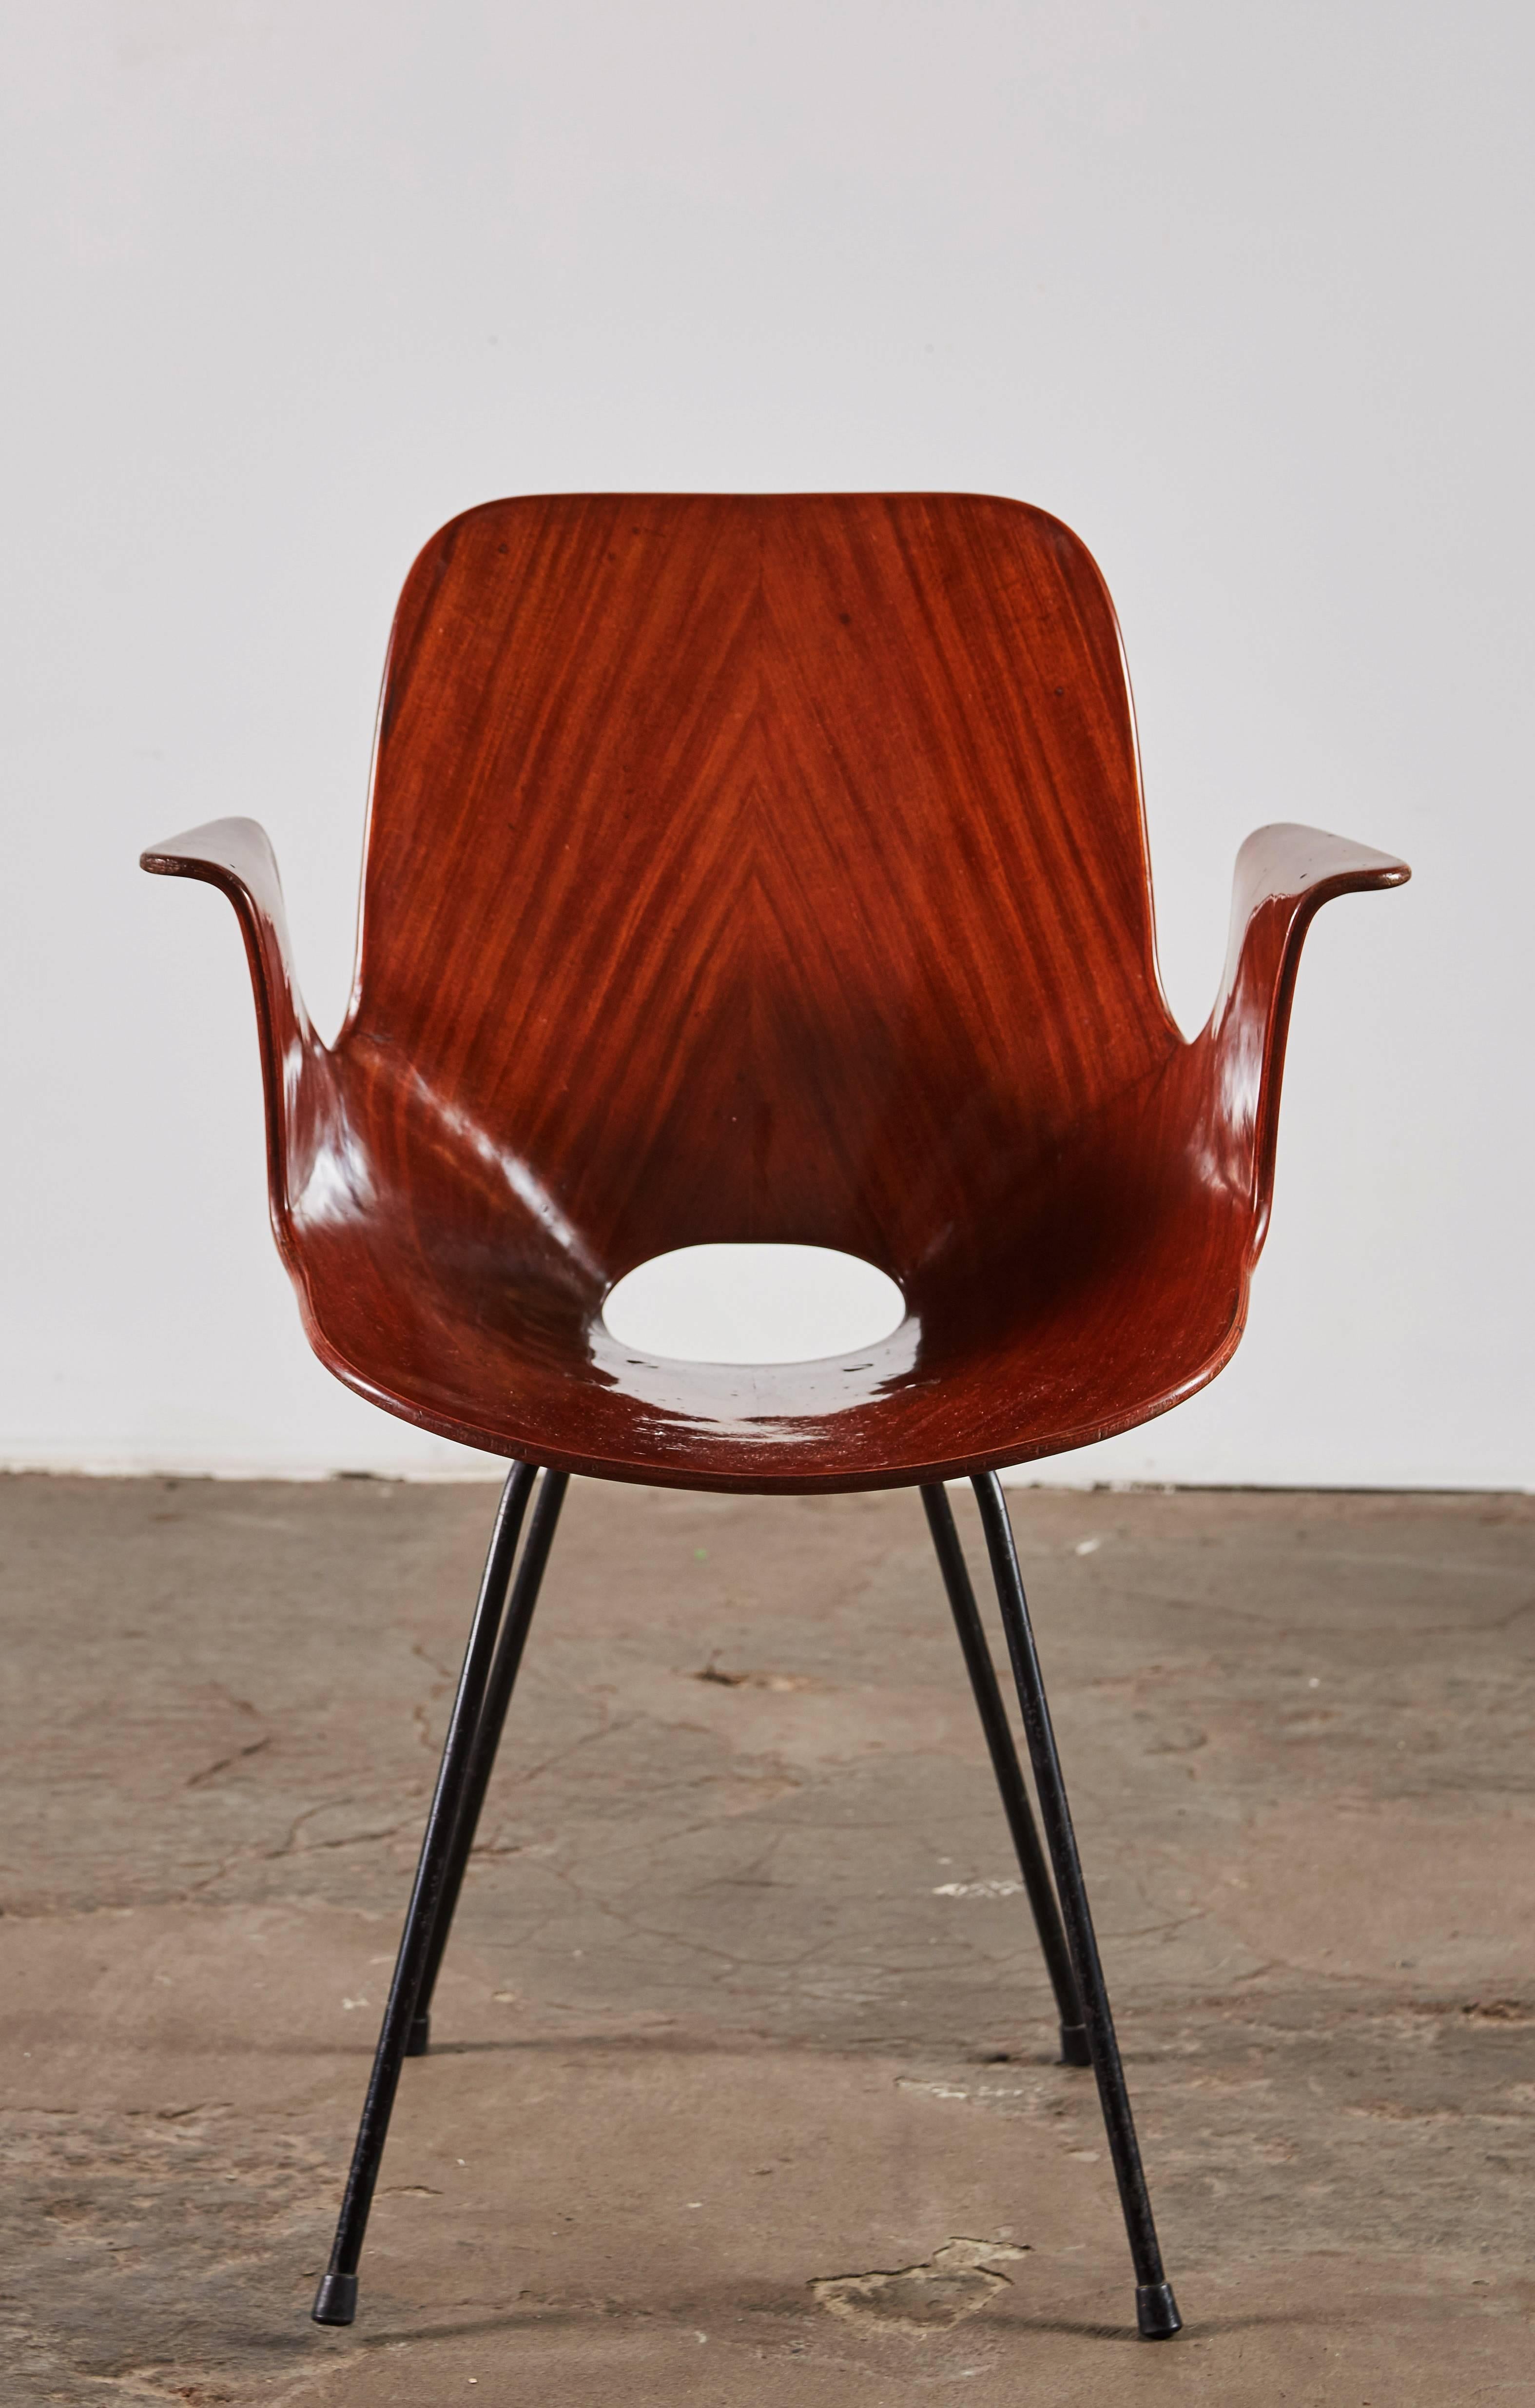 Mahogany bentwood Medea armchair by Vittorio Nobili for Fratelli Tagliabue. Made in Italy, circa 1956.